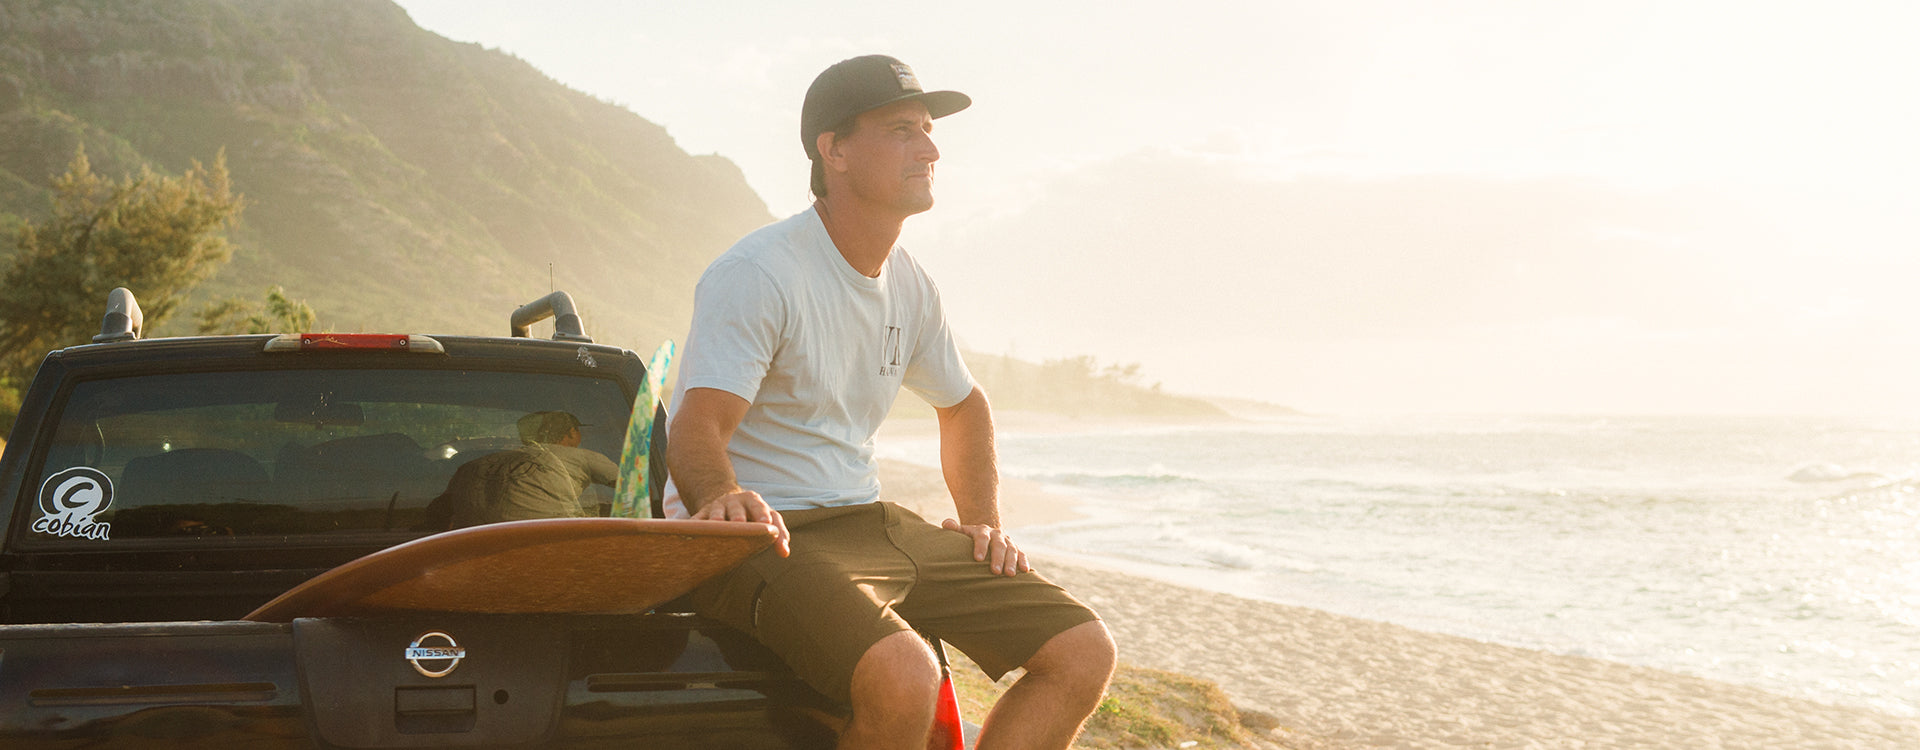 Aaron Gold sitting on a tailgate with his surfboard  looking over the ocean.